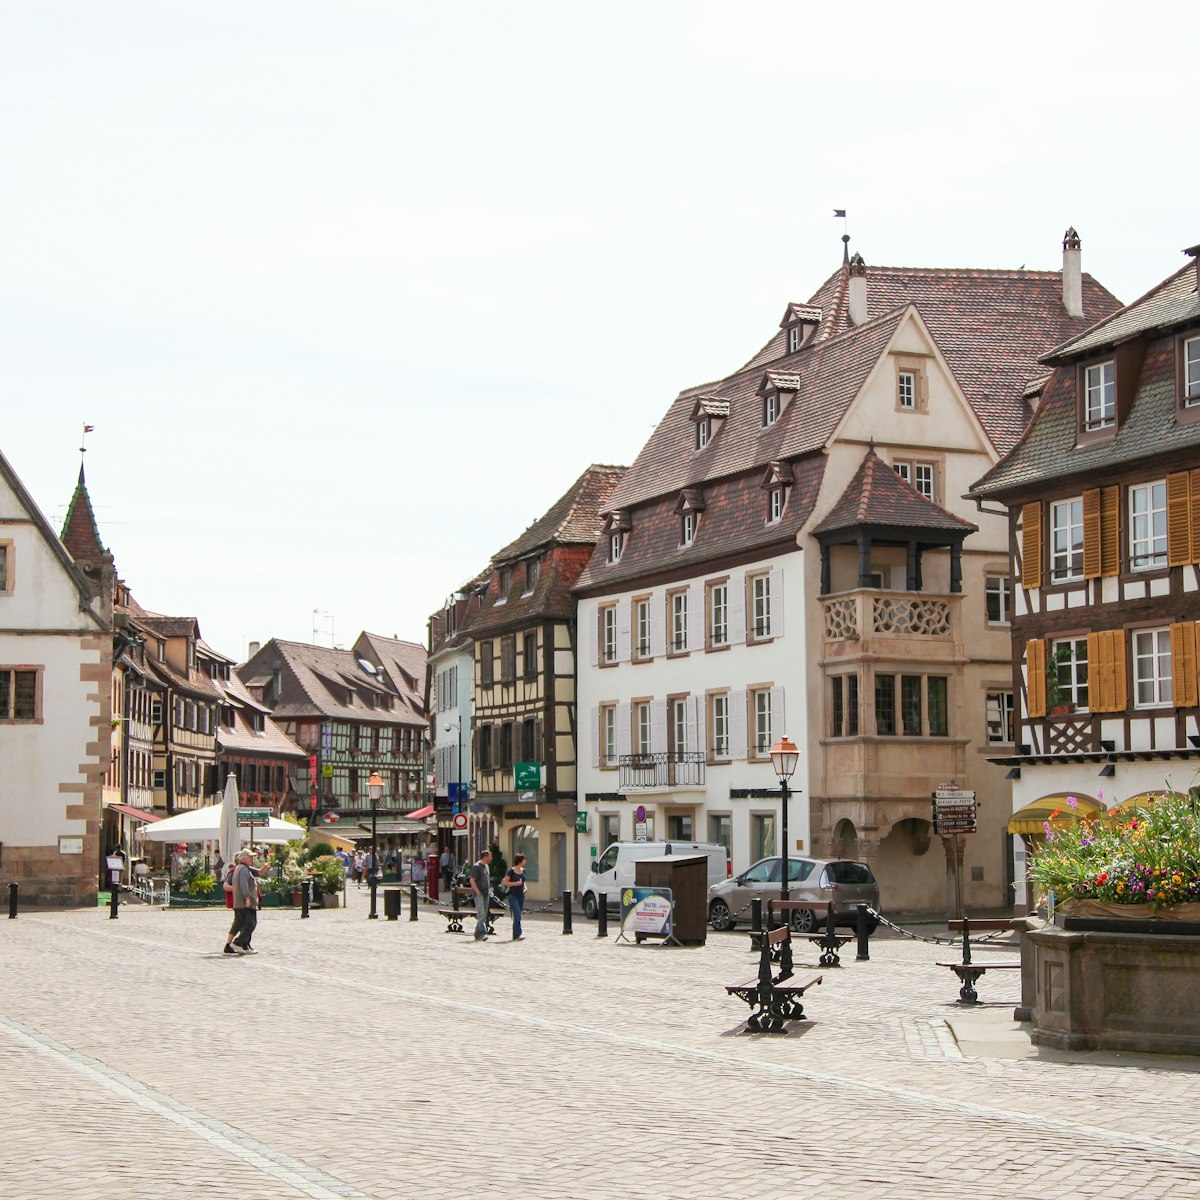 The Market square in the old center of Obernai, France.